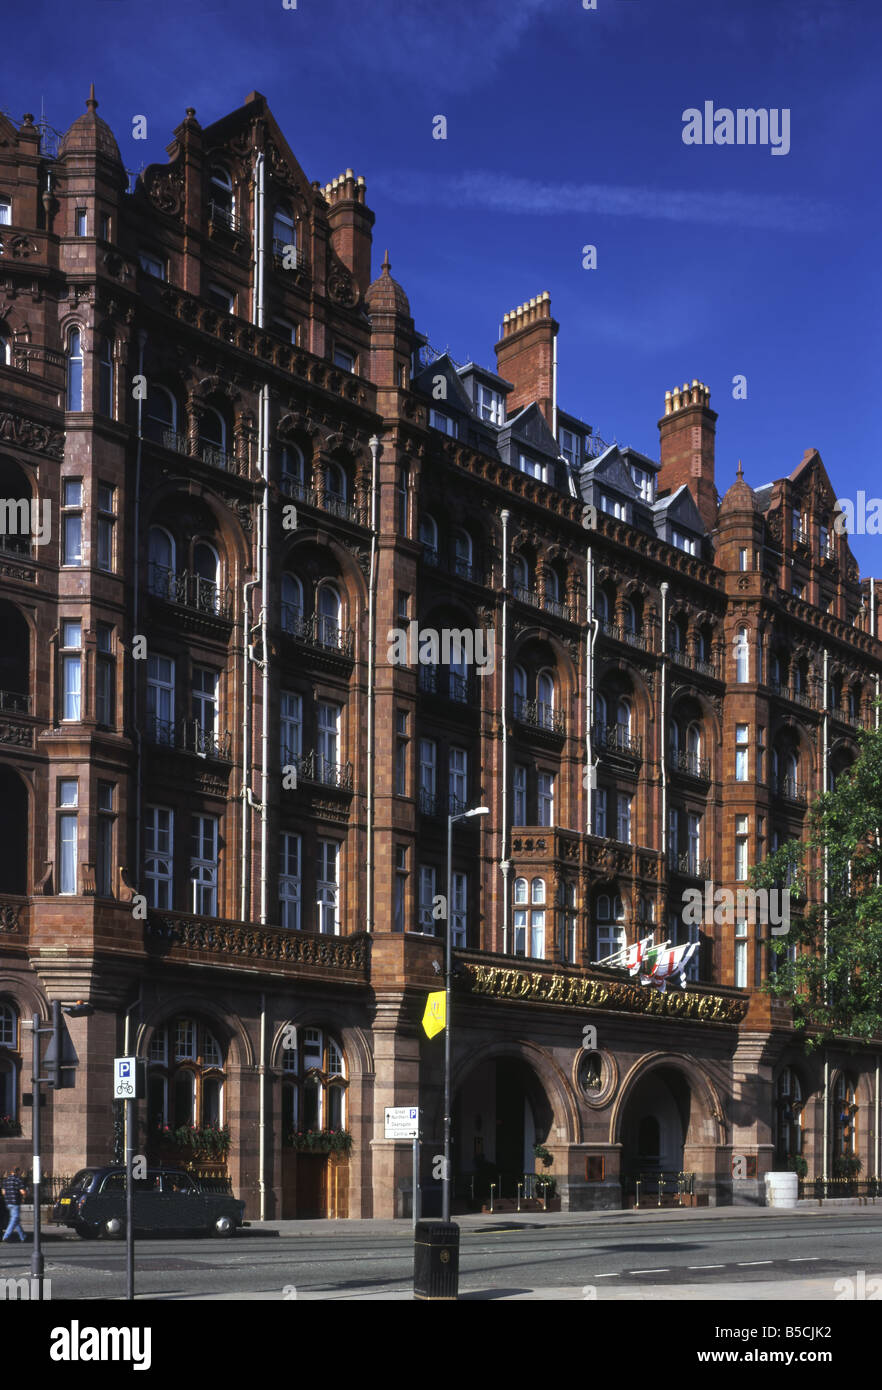 The Midland hotel in Manchester UK Stock Photo